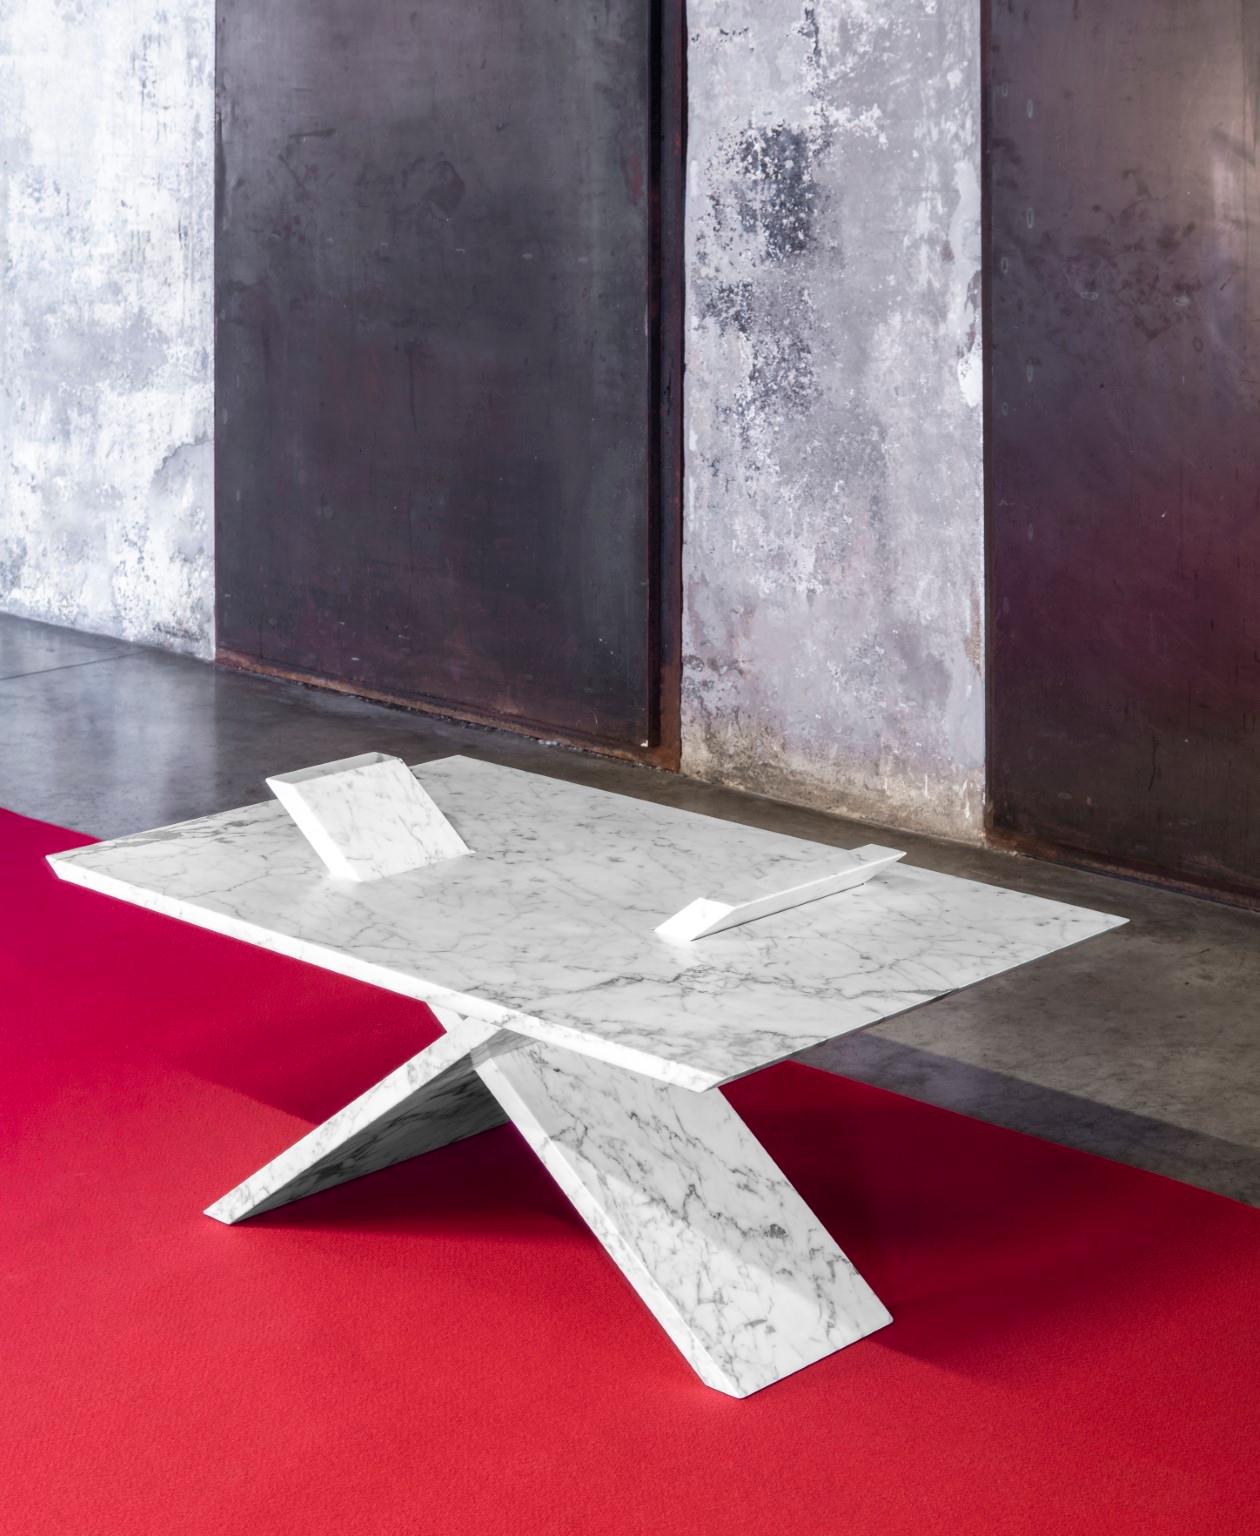 X-Marble by Mentemano
Dimensions: W 95 x D 60 x H 47 cm
Materials: Marmo di Carrara

This coffee table presents an X shape base partly coming out from the surface. The marble elements form an intersection of slabs, making a focus on the unique